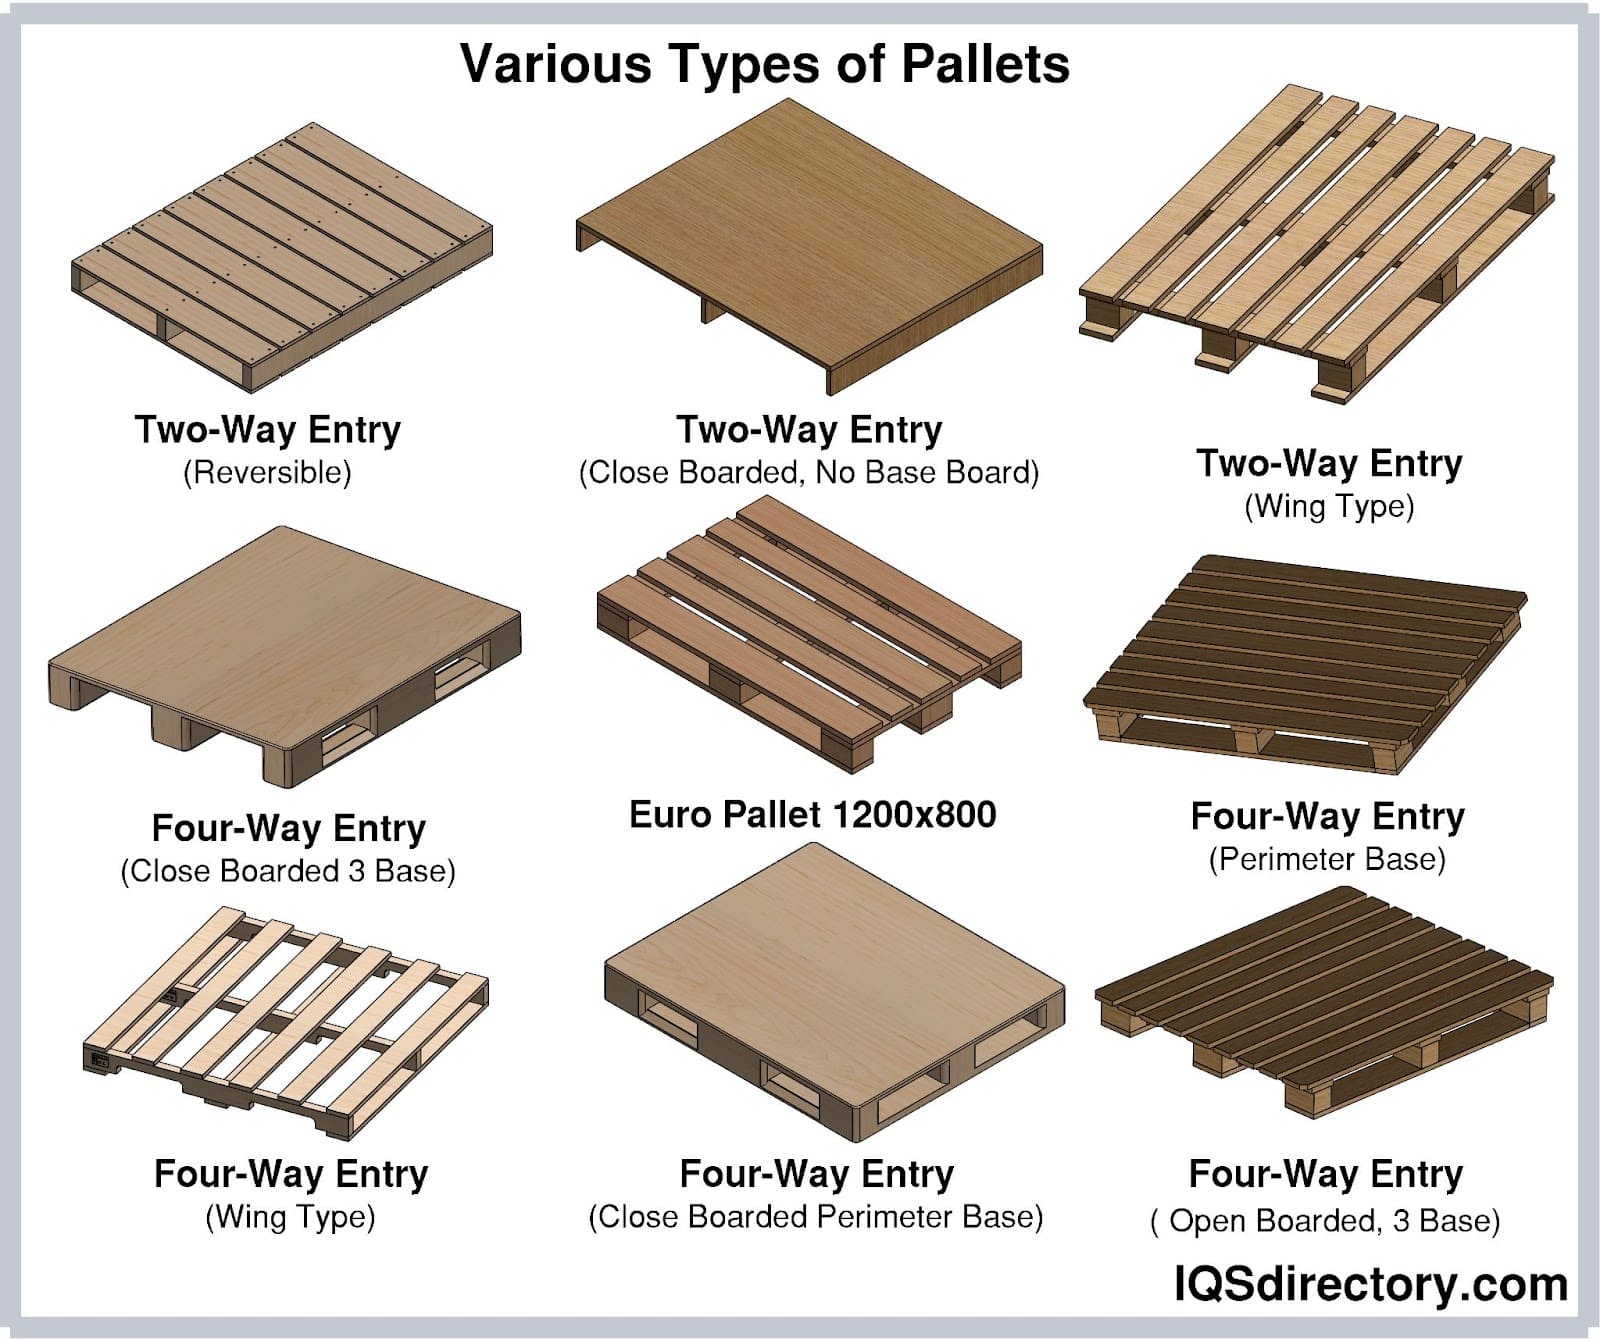 Various Types of Pallets